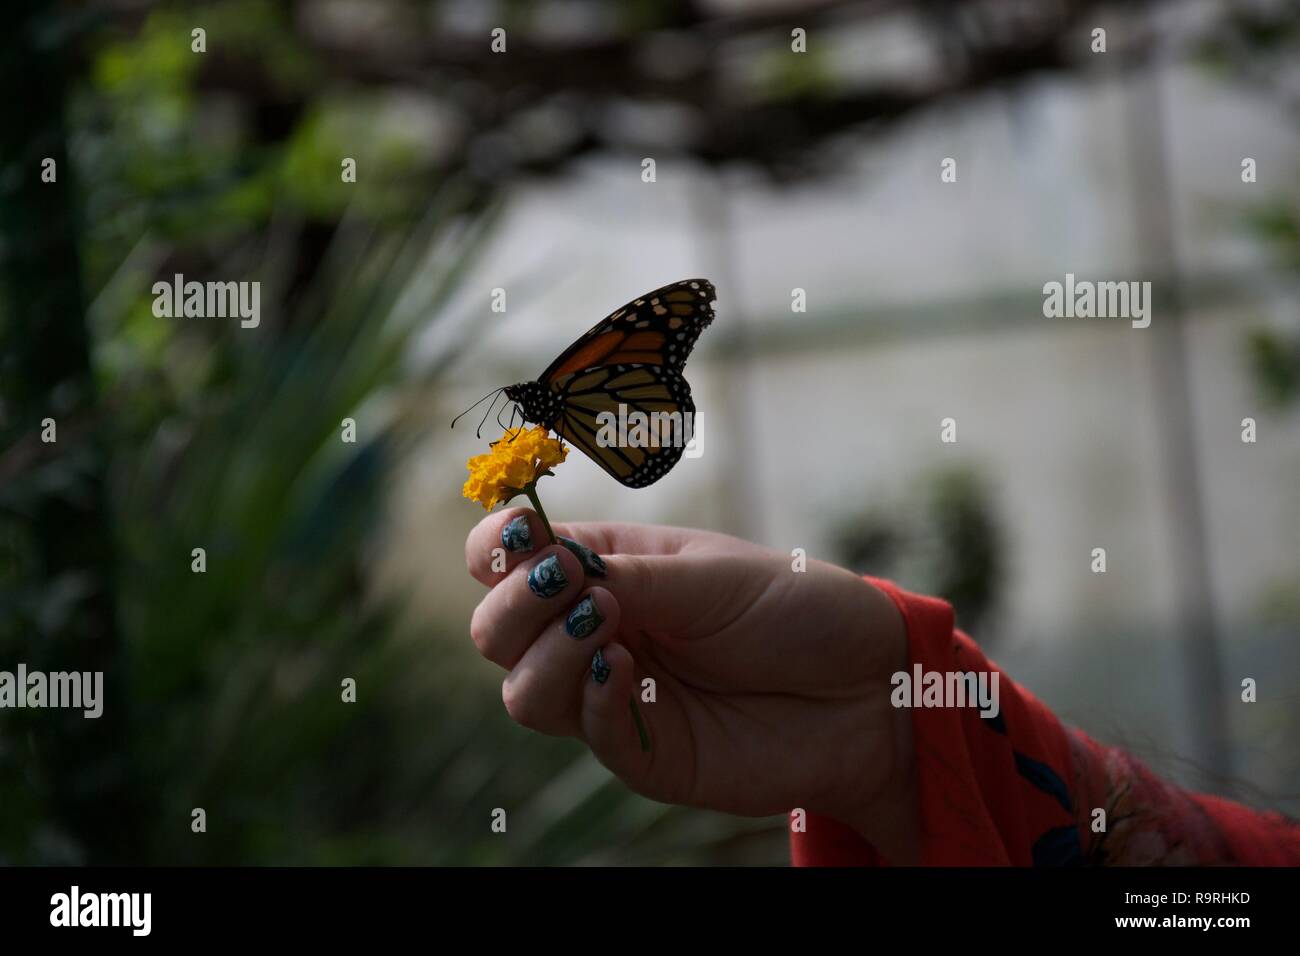 A shadowy photograph of a lady with painted nails holds a small yellow flower with an orange, yellow, black and white butterfly perched on it with clo Stock Photo